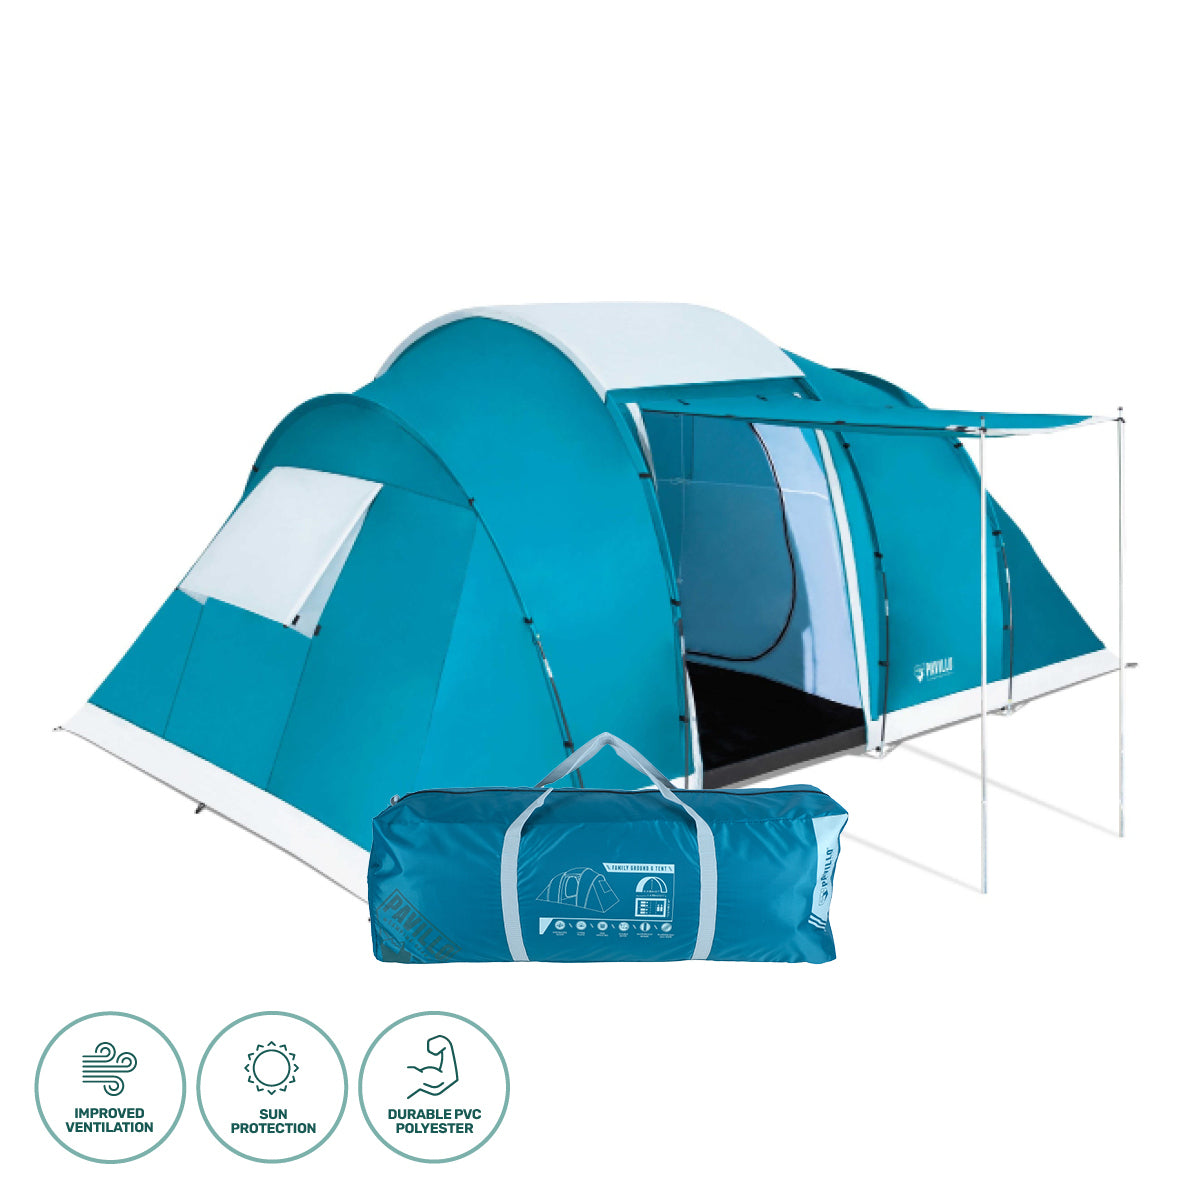 Bestway 4.9m x 2.m Tent 6 Person UV Protected Premium Double Layered PVC